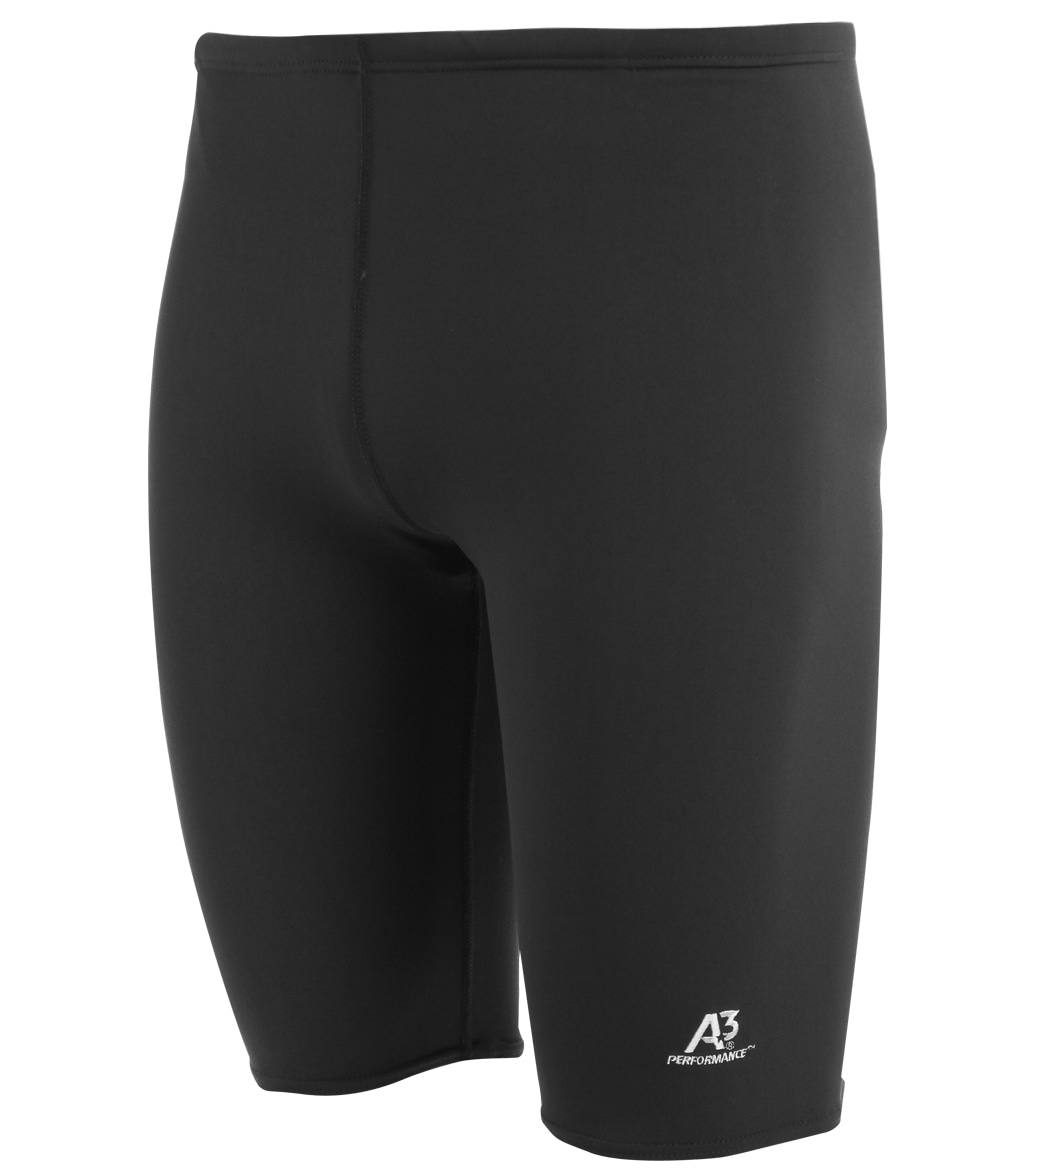 A3 Performance Poly Jammer Swimsuit - Black 26 Polyester/Pbt - Swimoutlet.com